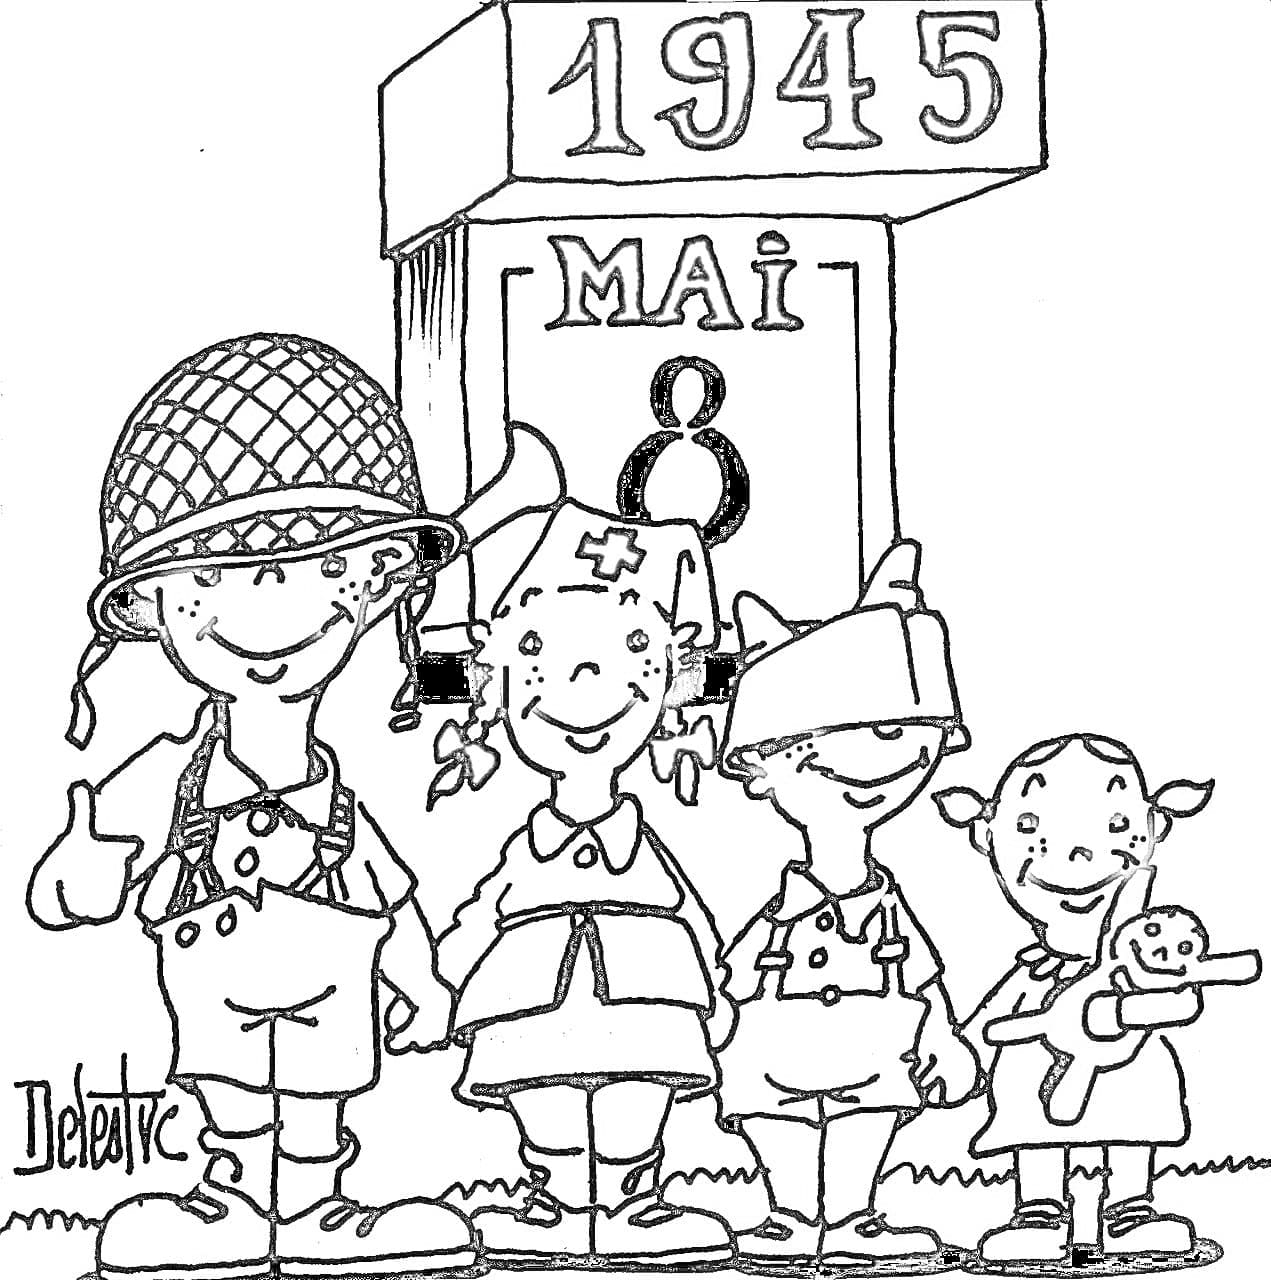 Victory day in france coloring page